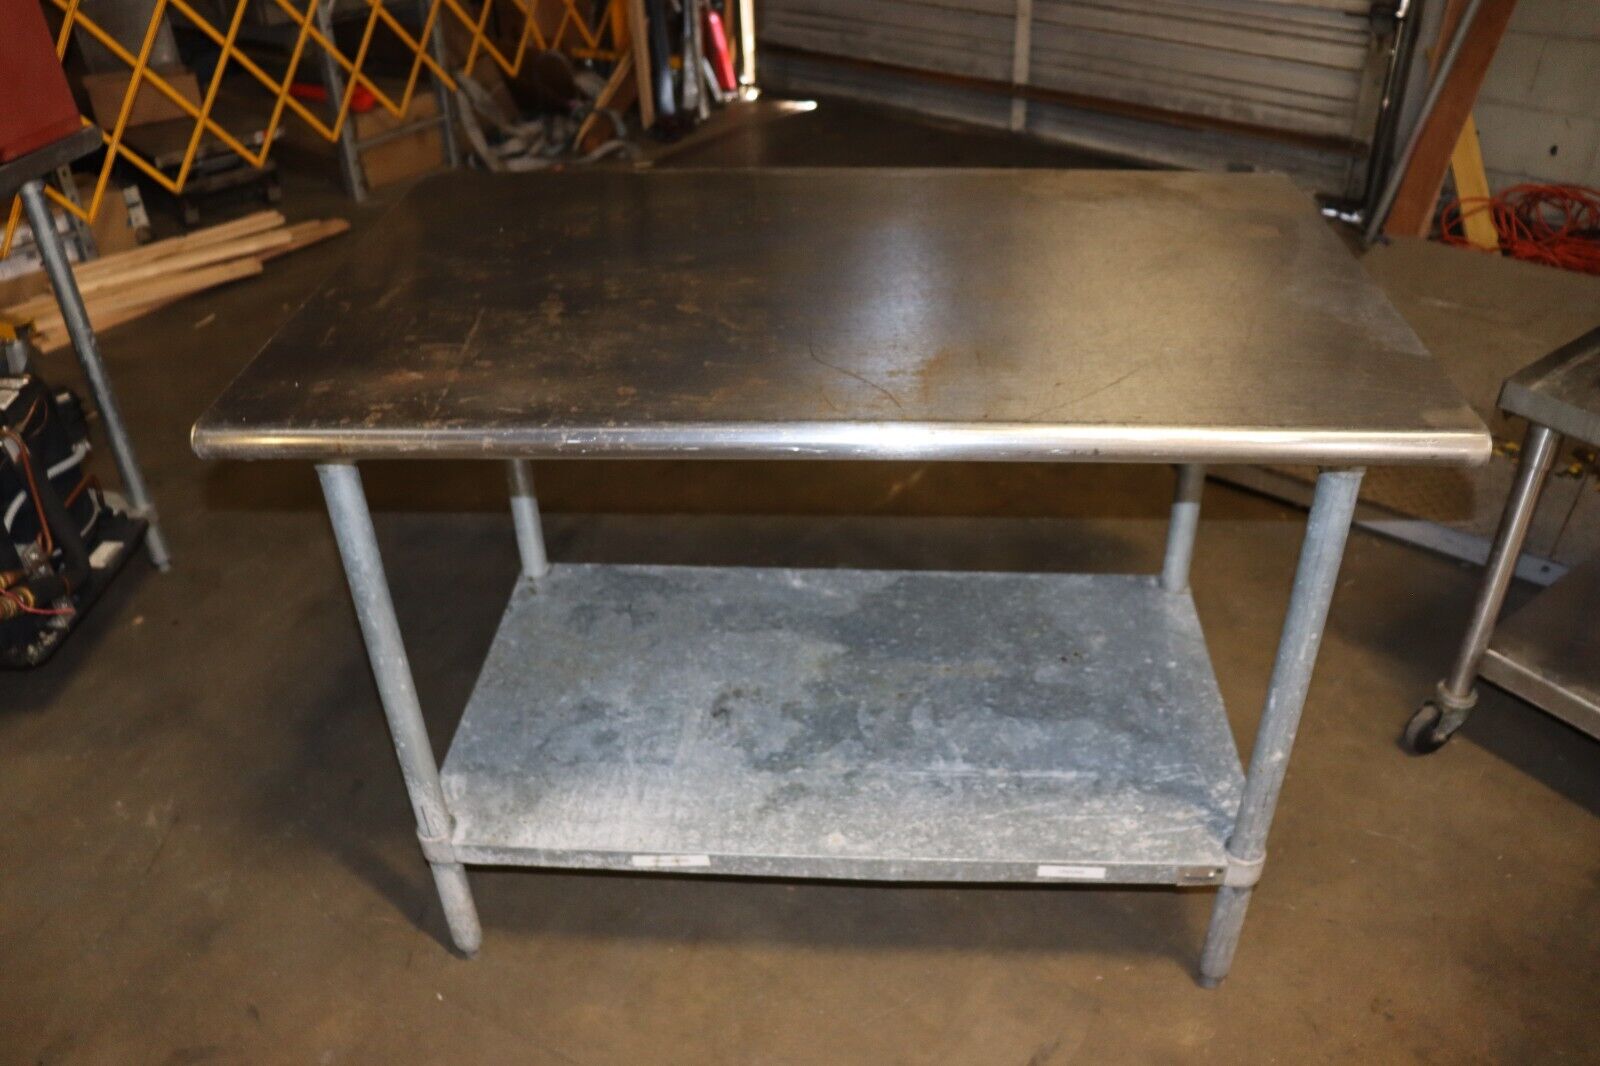 Advance Tabco 48" x 30" S/s Work Table 18 Gauge with Galvanized Undershelf, Used